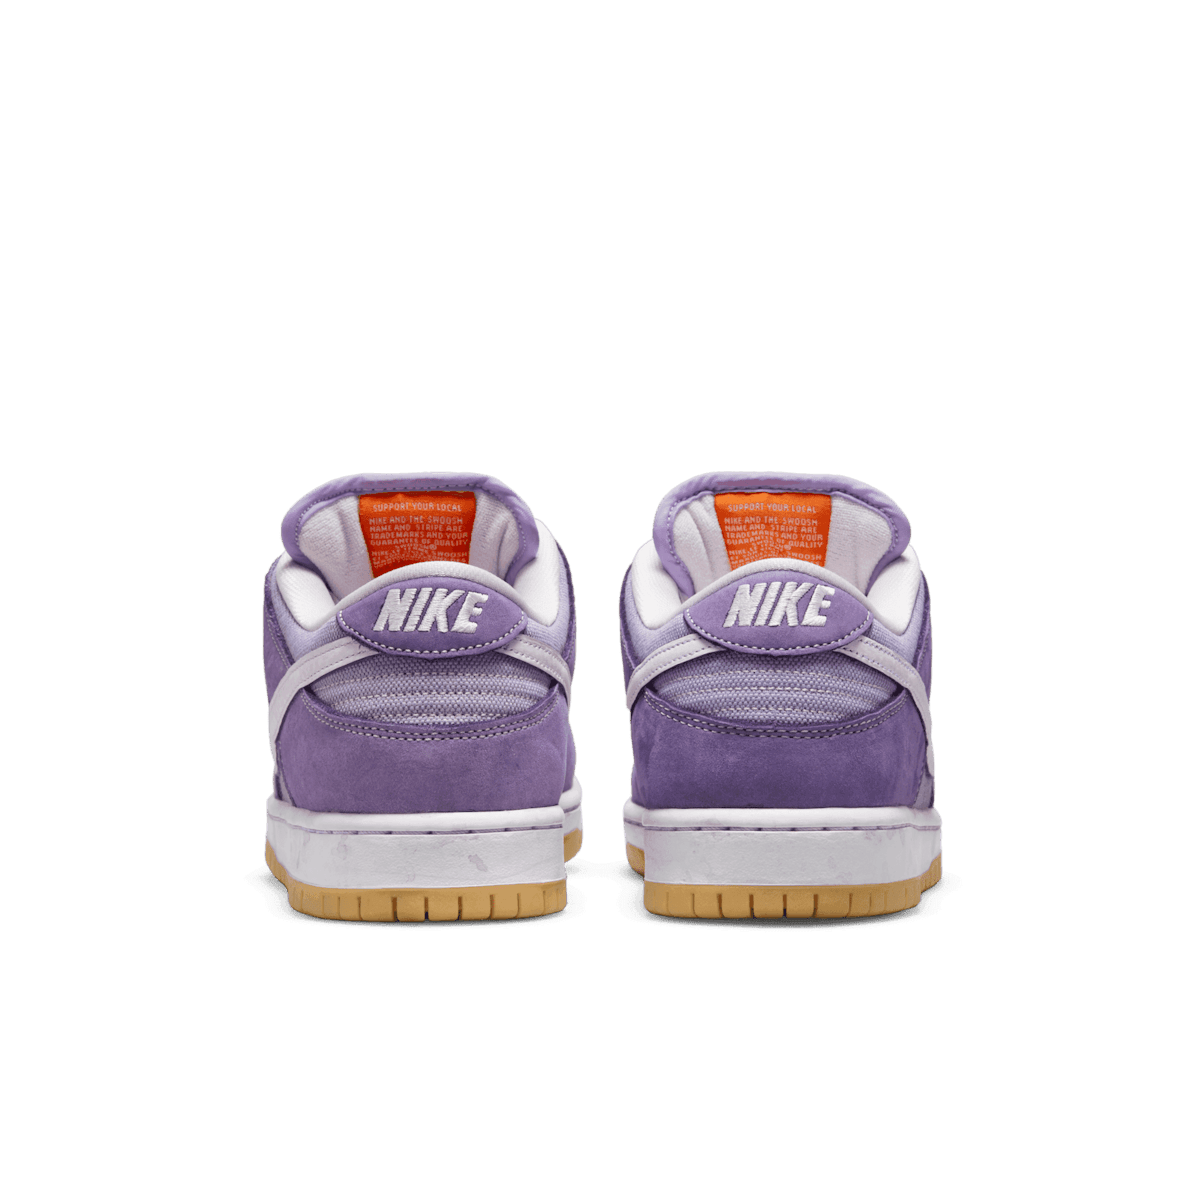 Nike SB Dunk Low Orange Label Unbleached Pack Lilac Angle 3